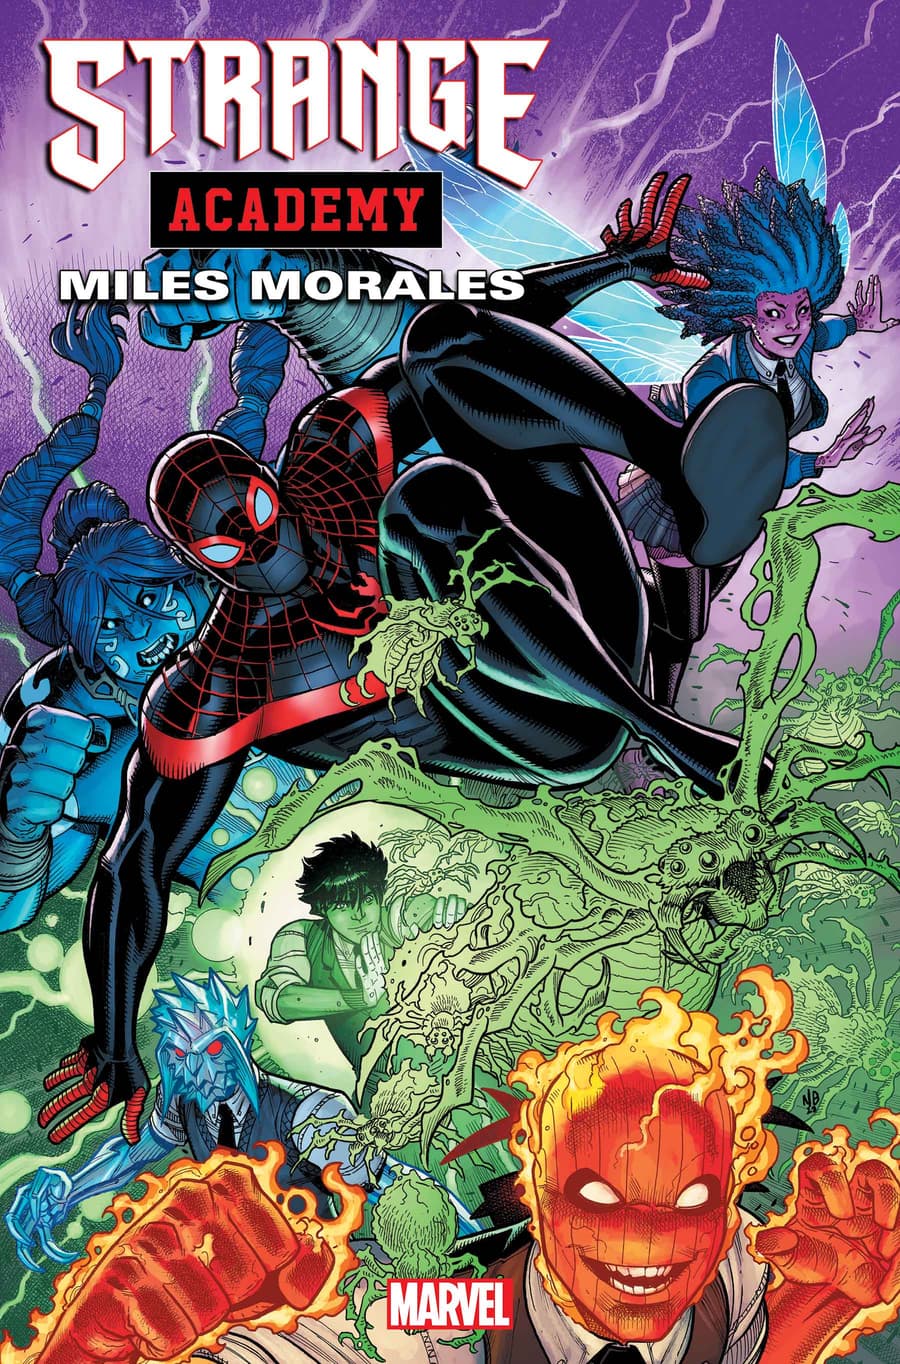 STRANGE ACADEMY: MILES MORALES #1 cover by Nick Bradshaw